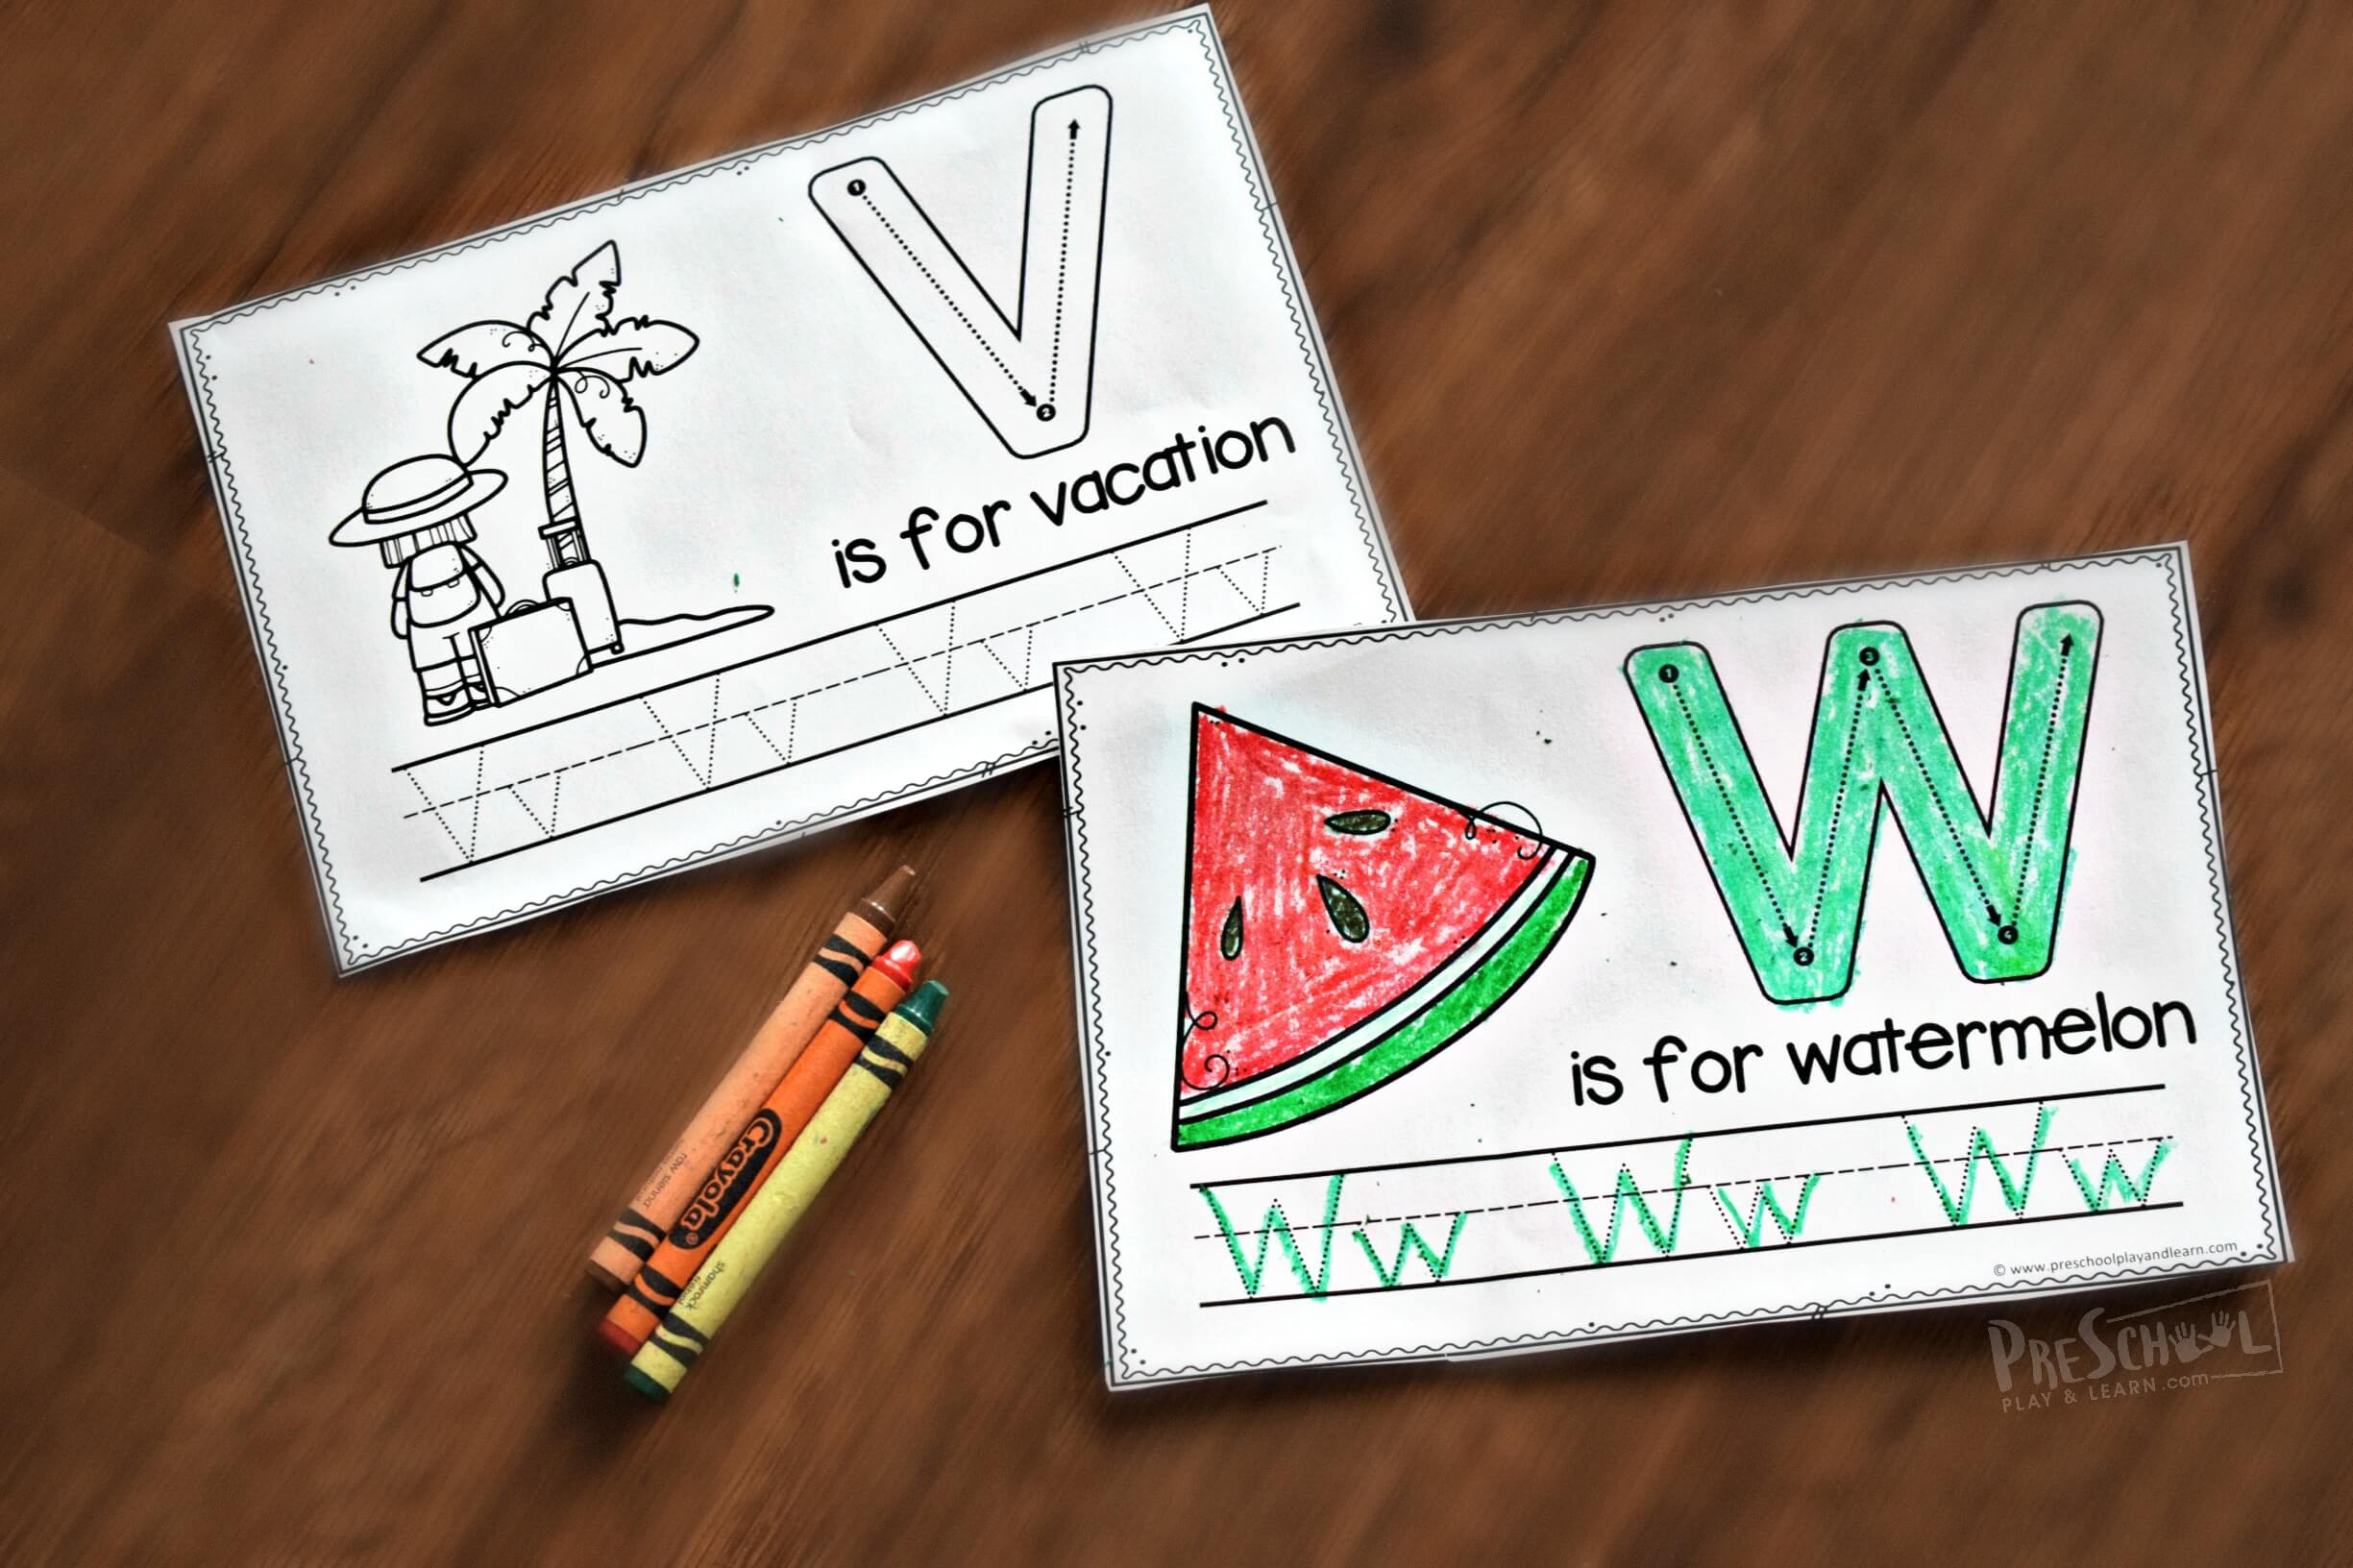 free summer handwriting tracing worksheets for kids